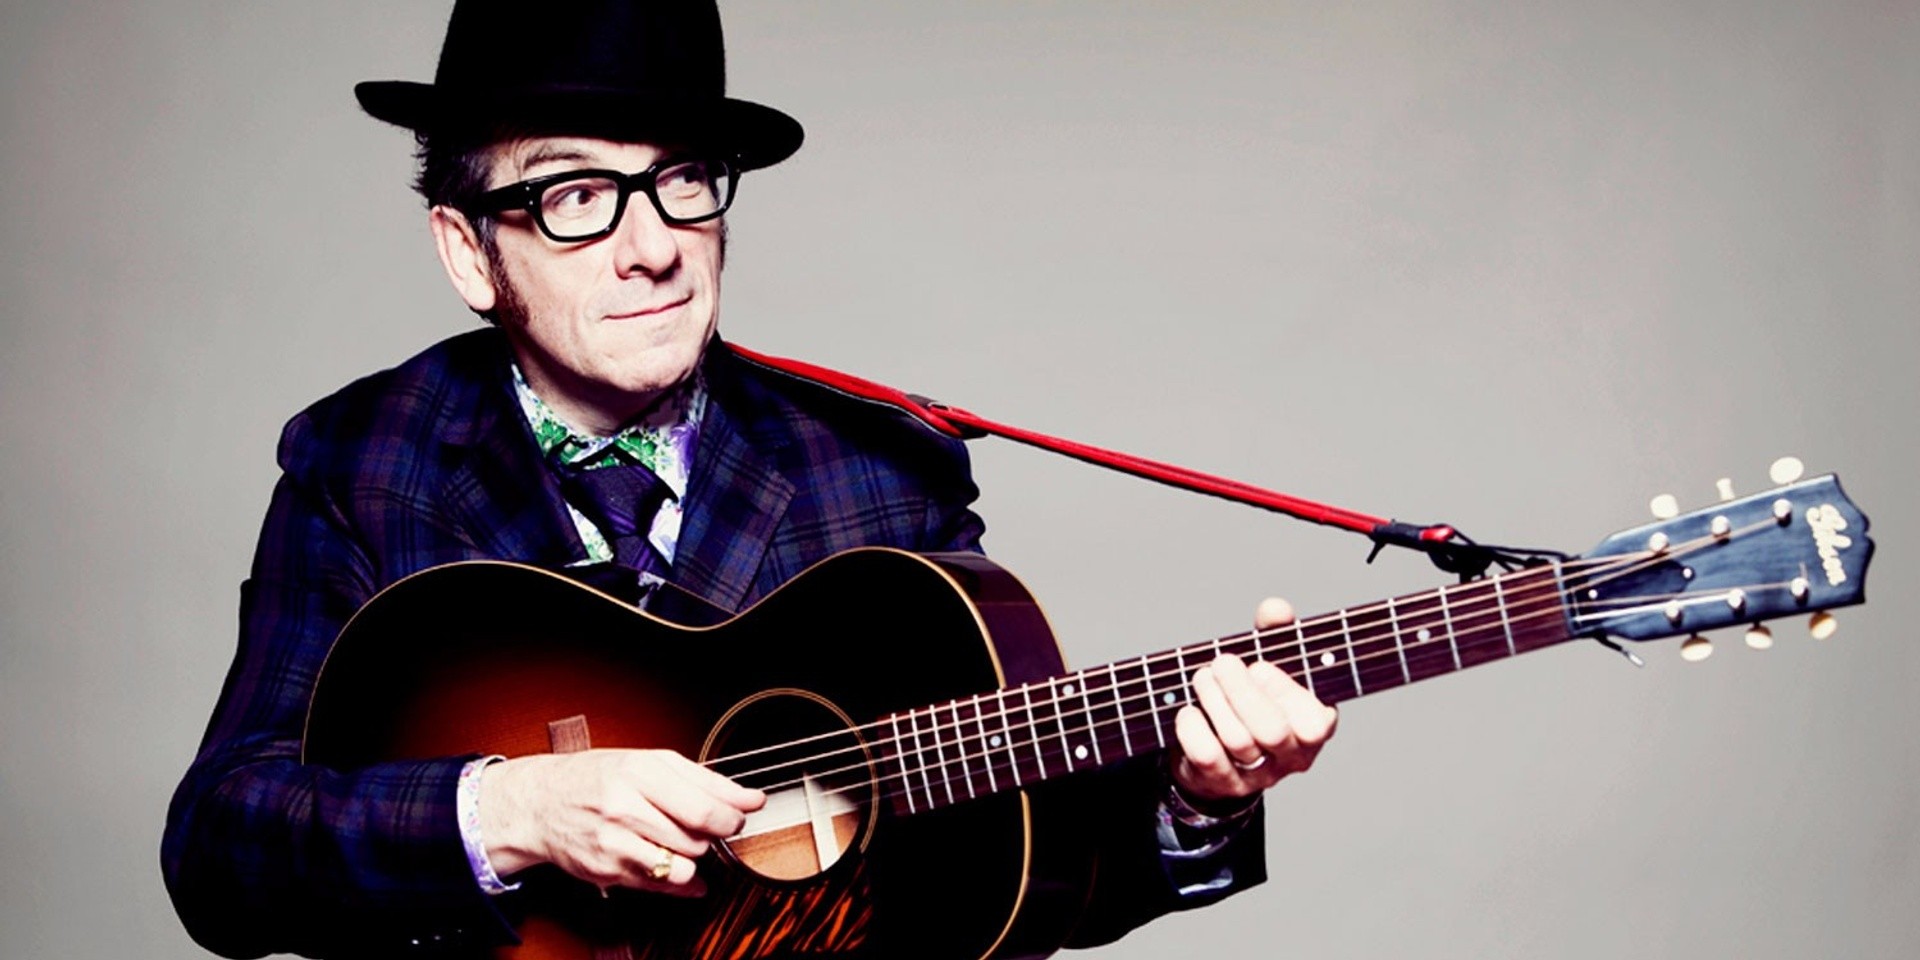 Elvis Costello detours into the Esplanade Concert Hall this September with a career-spanning retrospective